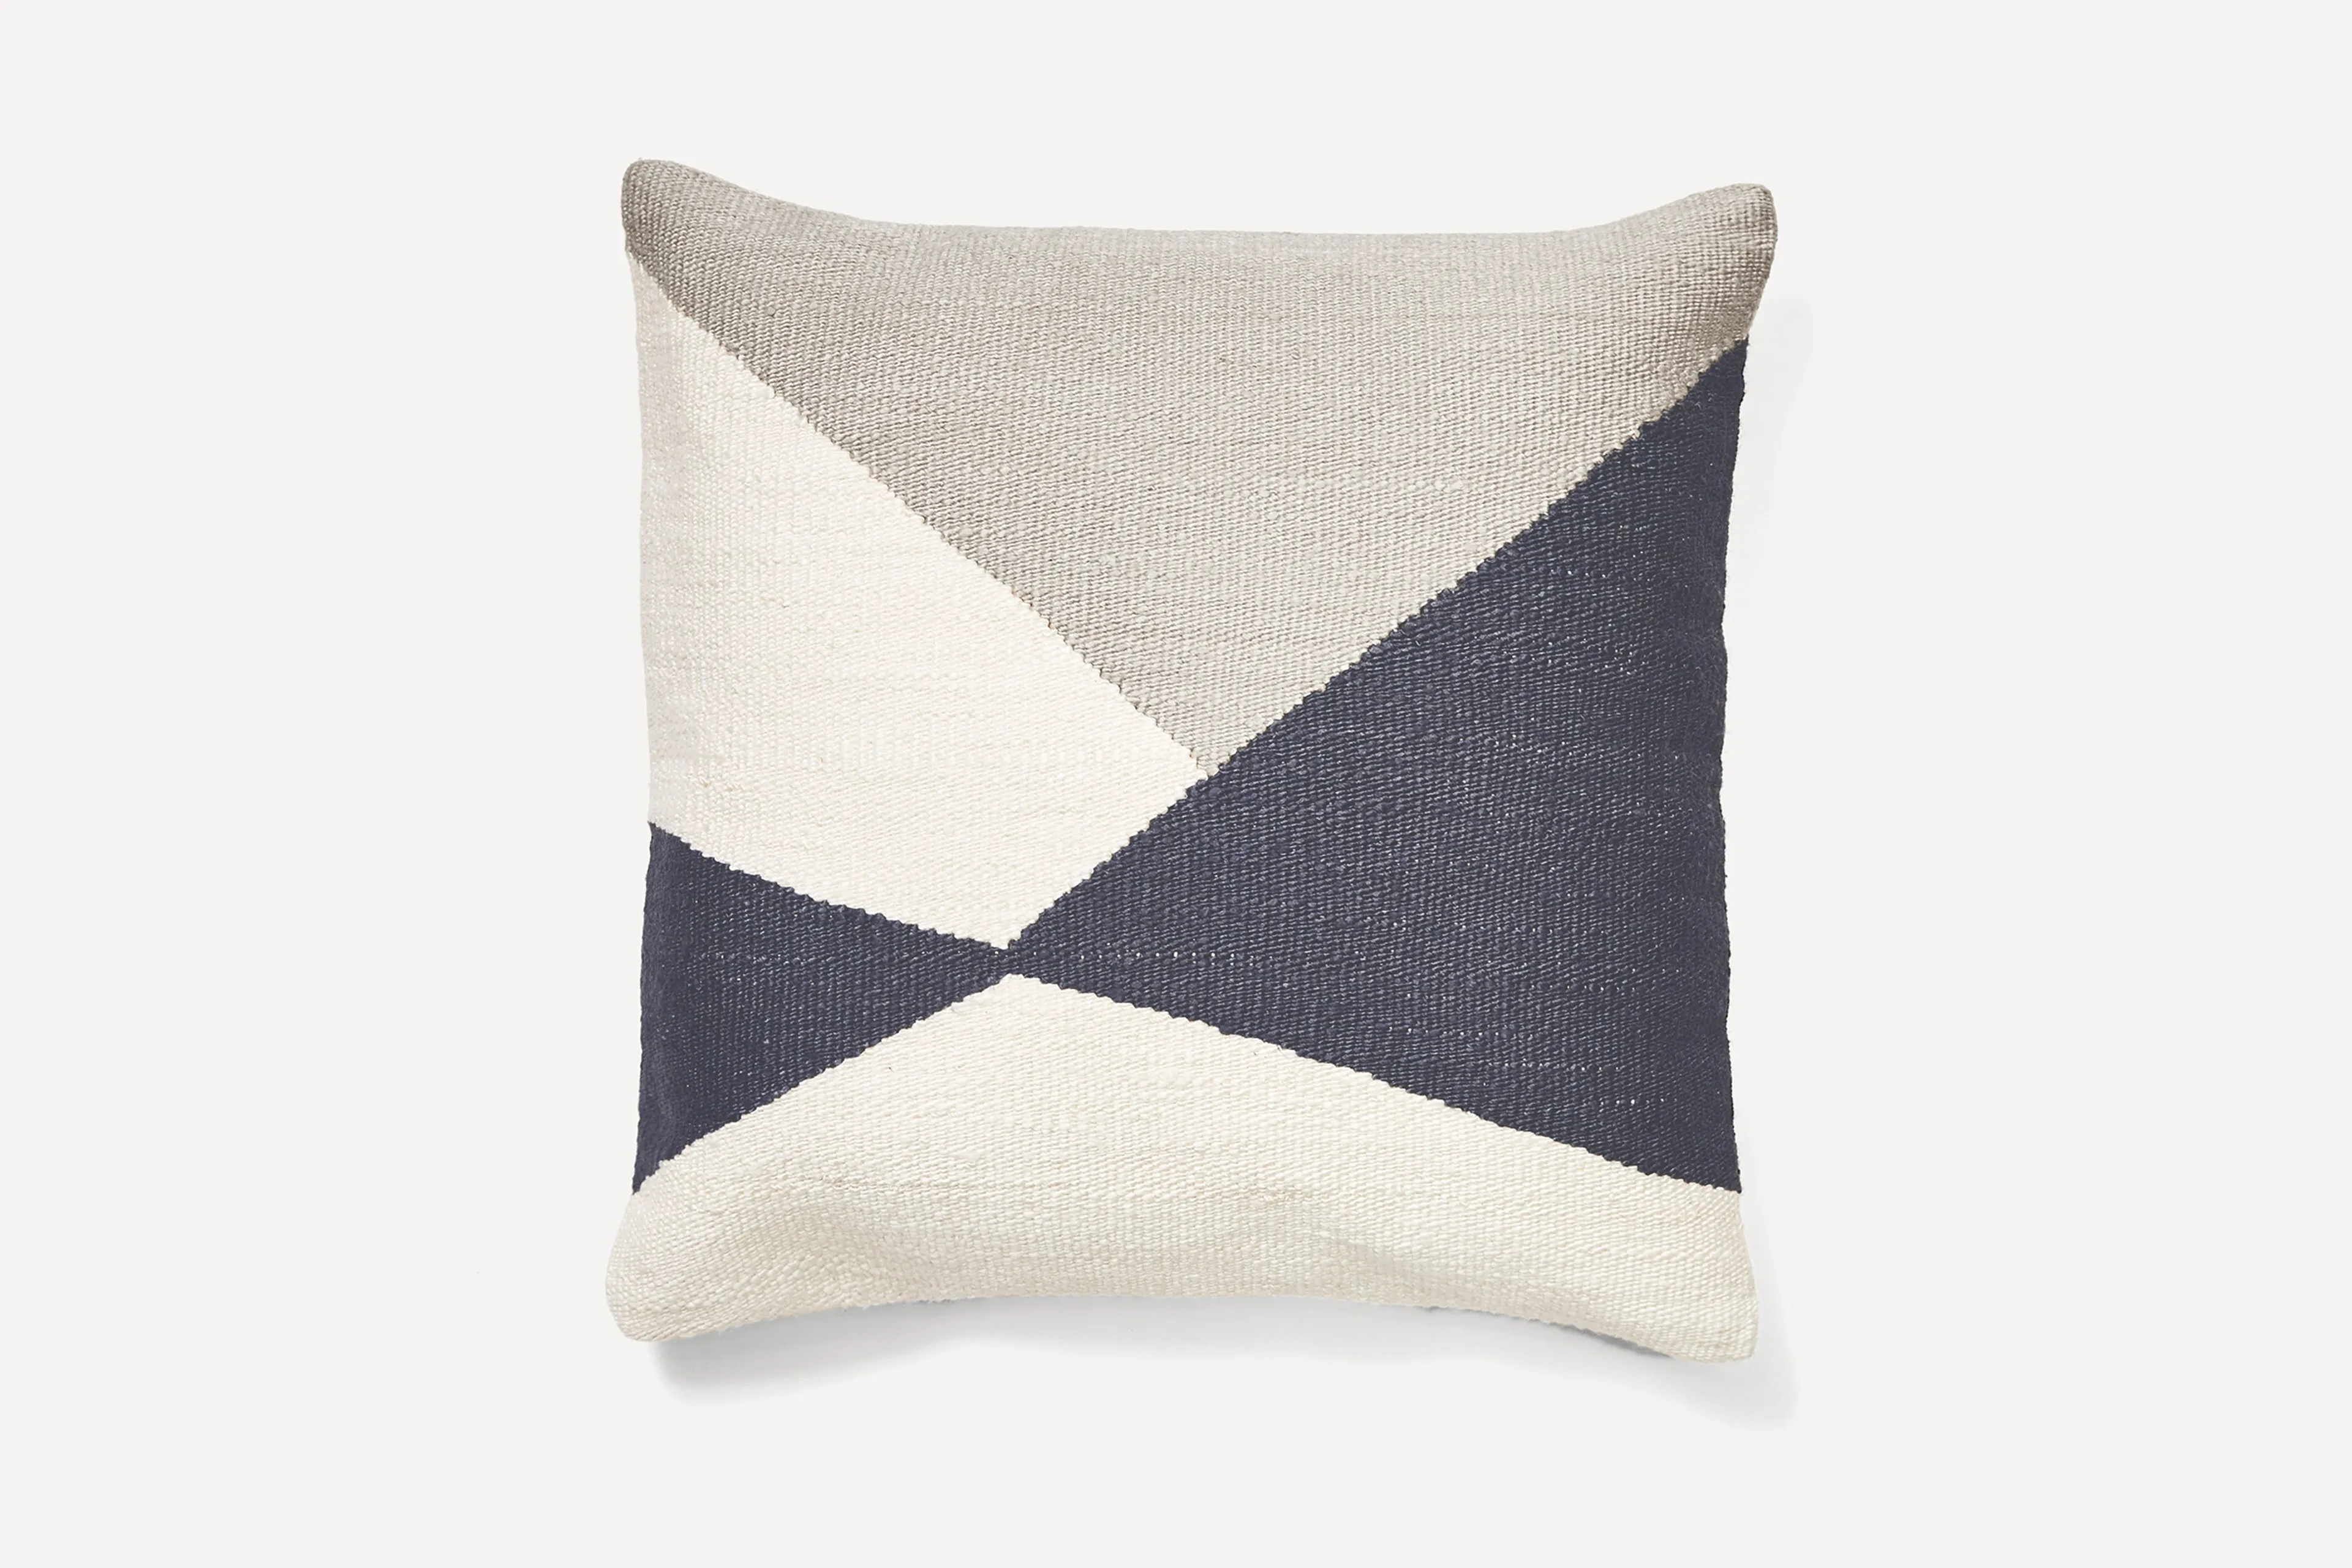 Overcast Fractured Pillow Cover